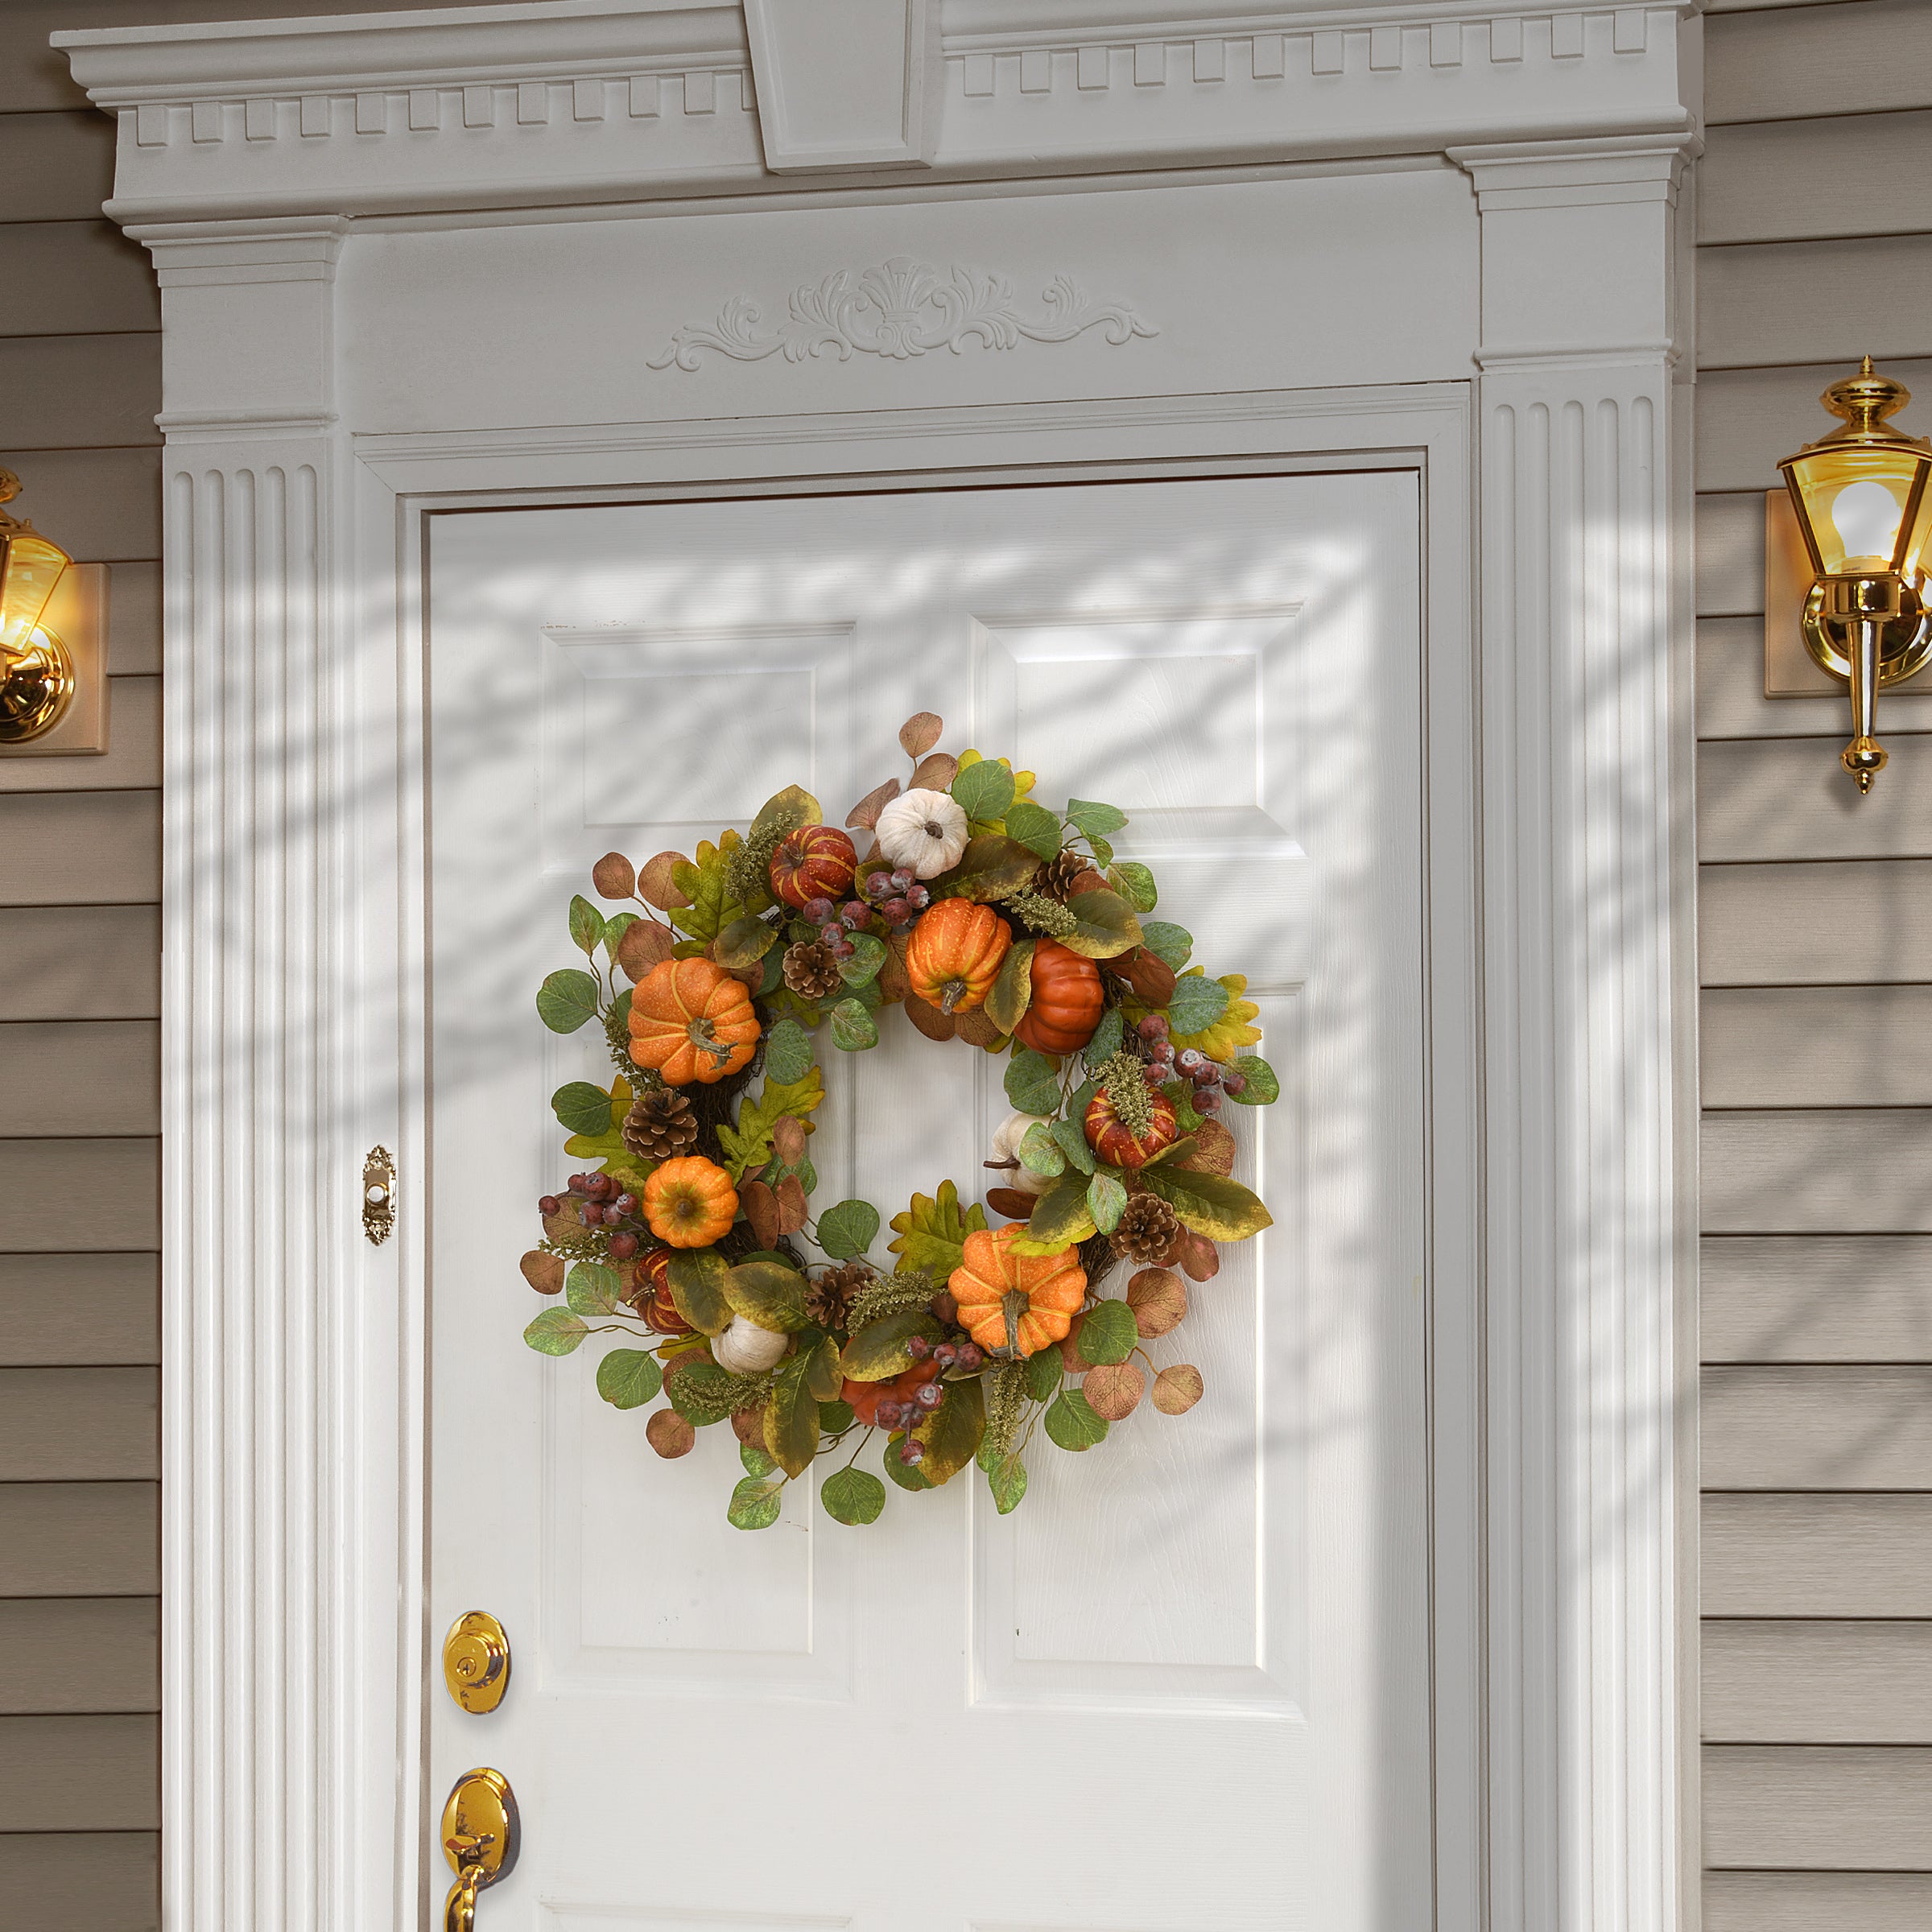 Artificial Autumn Wreath, Decorated with Miniature Pumpkins, Pine Cones, Berry Clusters, Leaves, Autumn Collection, 22 Inches